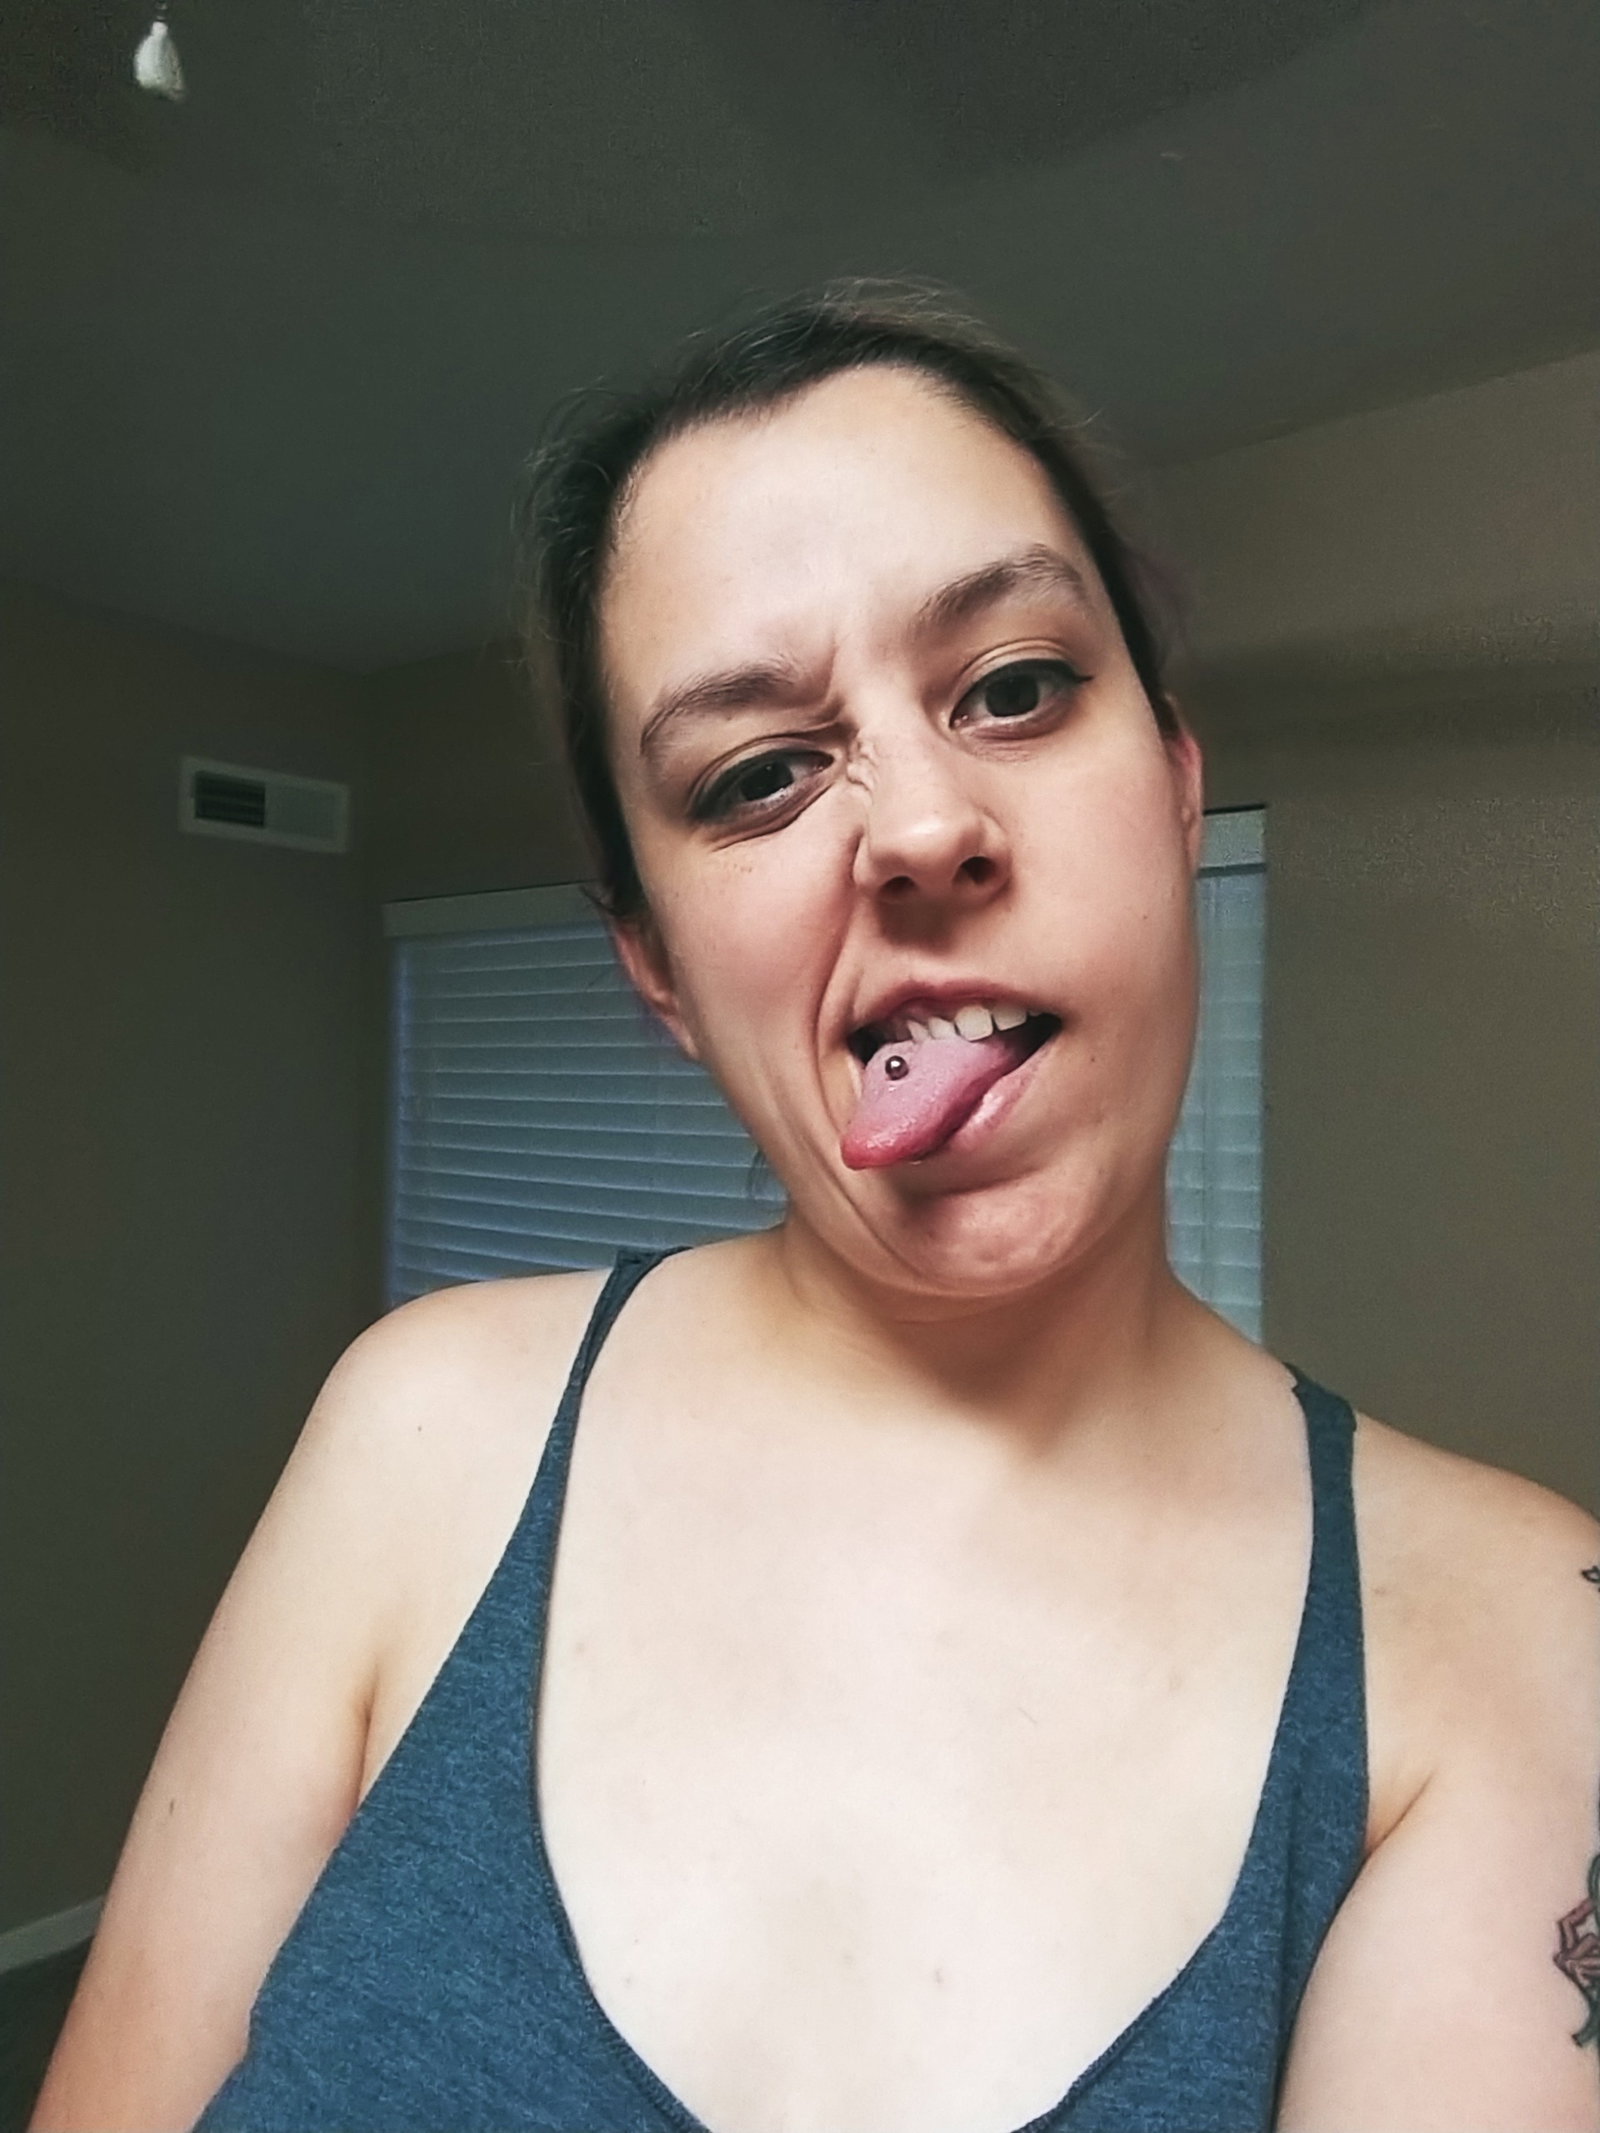 Watch the Photo by AkaraFang with the username @AkaraFang, who is a star user, posted on September 12, 2019. The post is about the topic Amateurs. and the text says 'More uncensored content on my OF, only freebies here

https://onlyfans.com/akarafang'